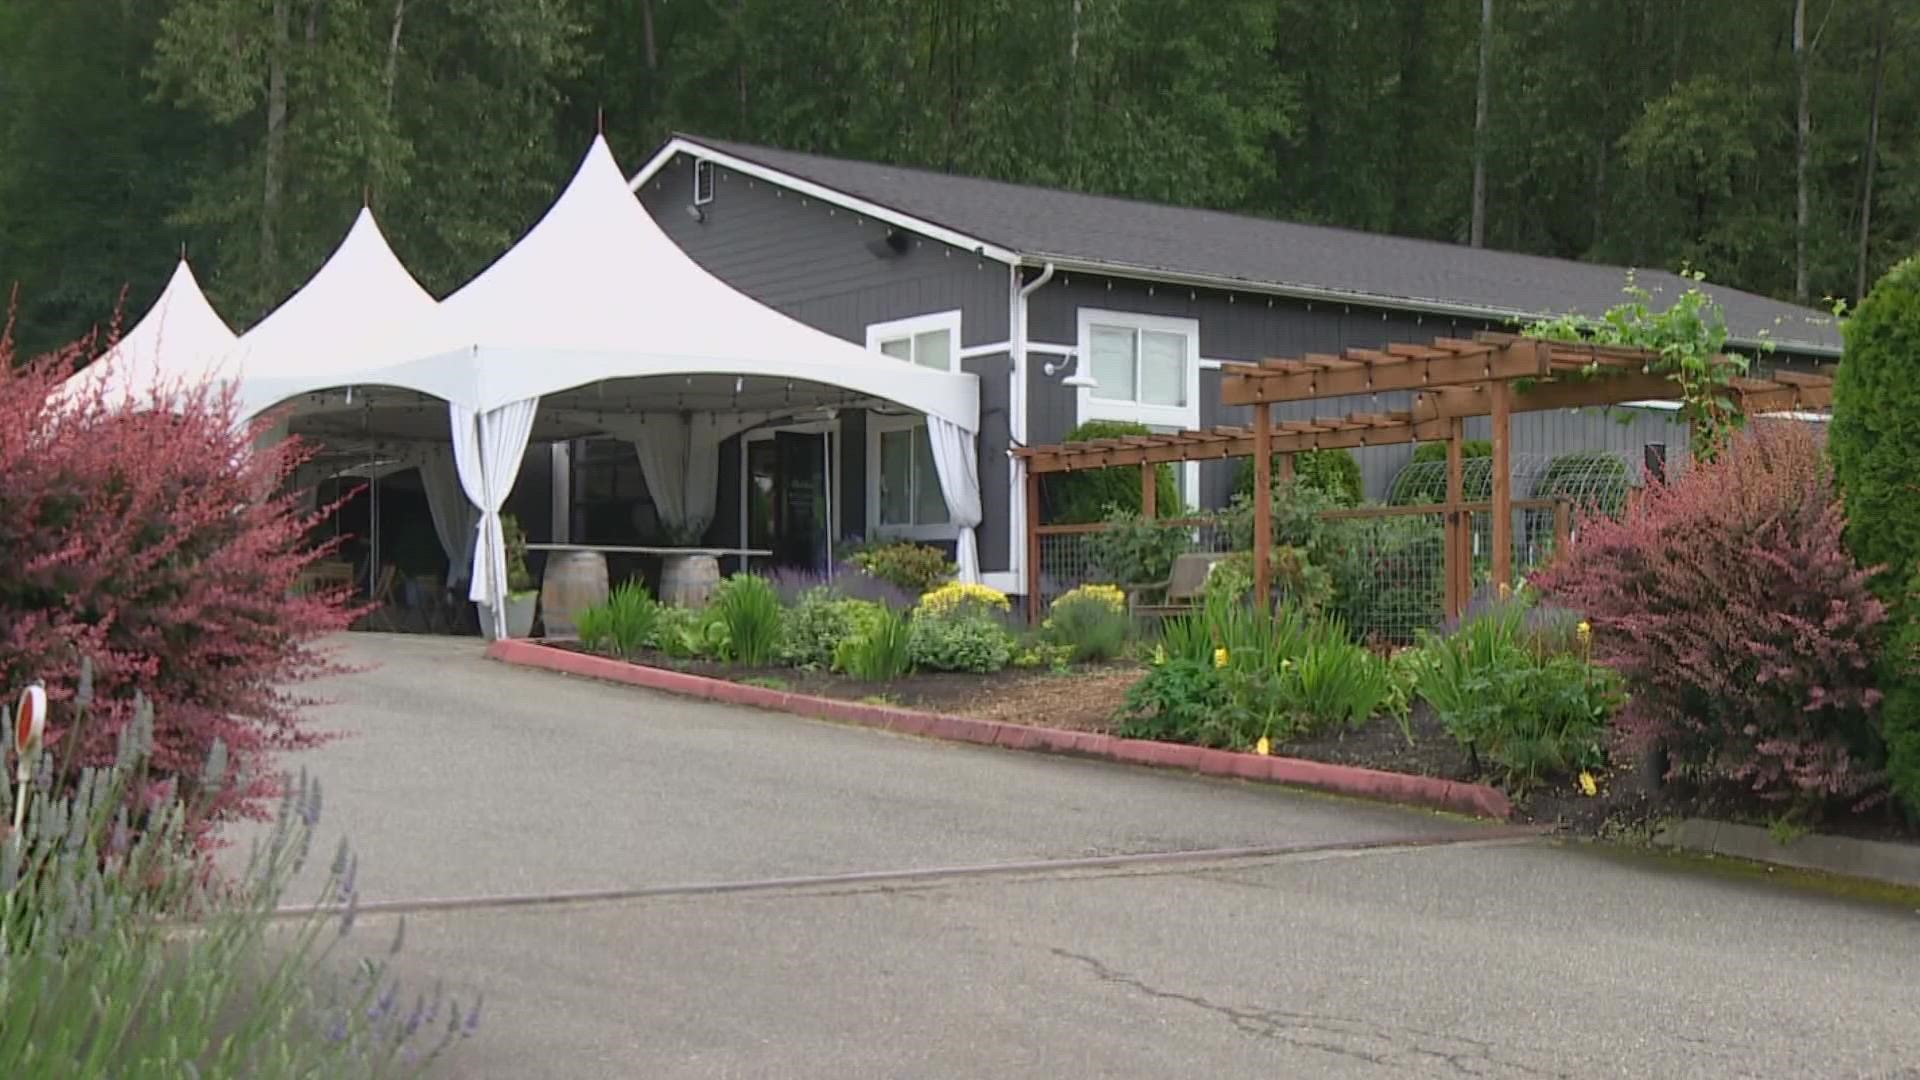 The King County Council was supposed to vote on an ordinance that would impact farmers and businesses, but instead of a yes or no, it’s going back to committee.